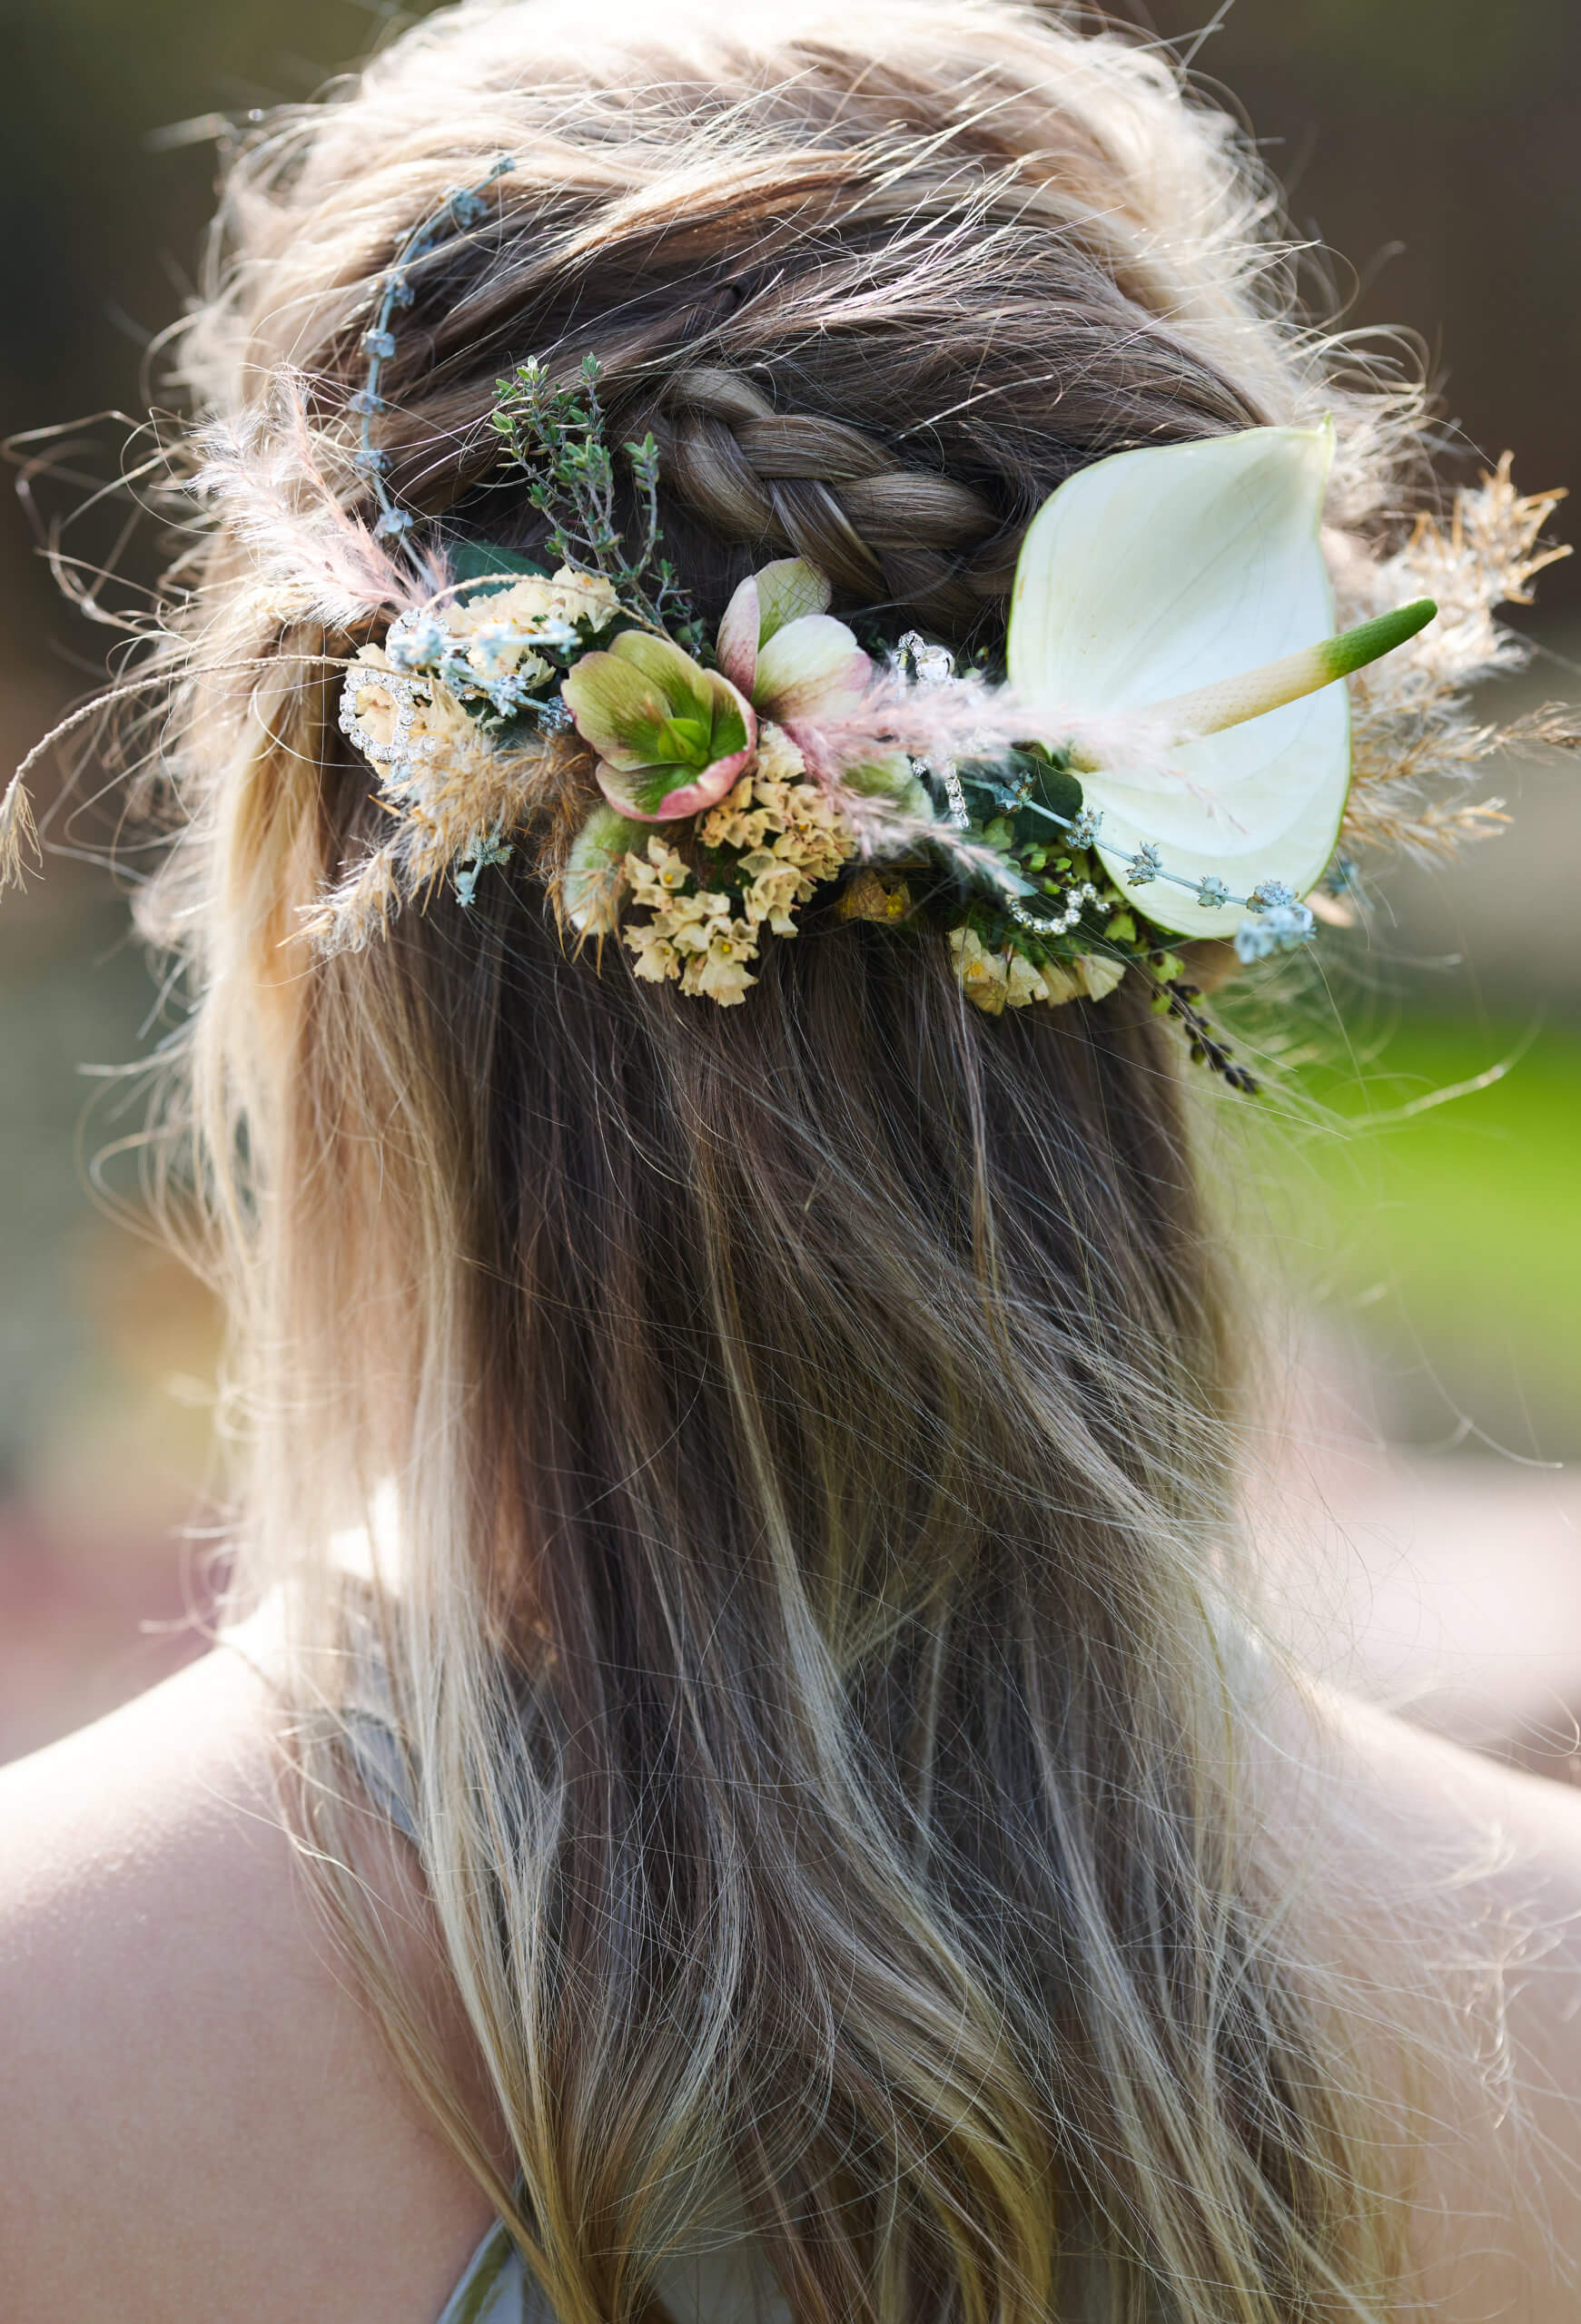 How to use the Anthurium flower in a stunning bridal hairstyle